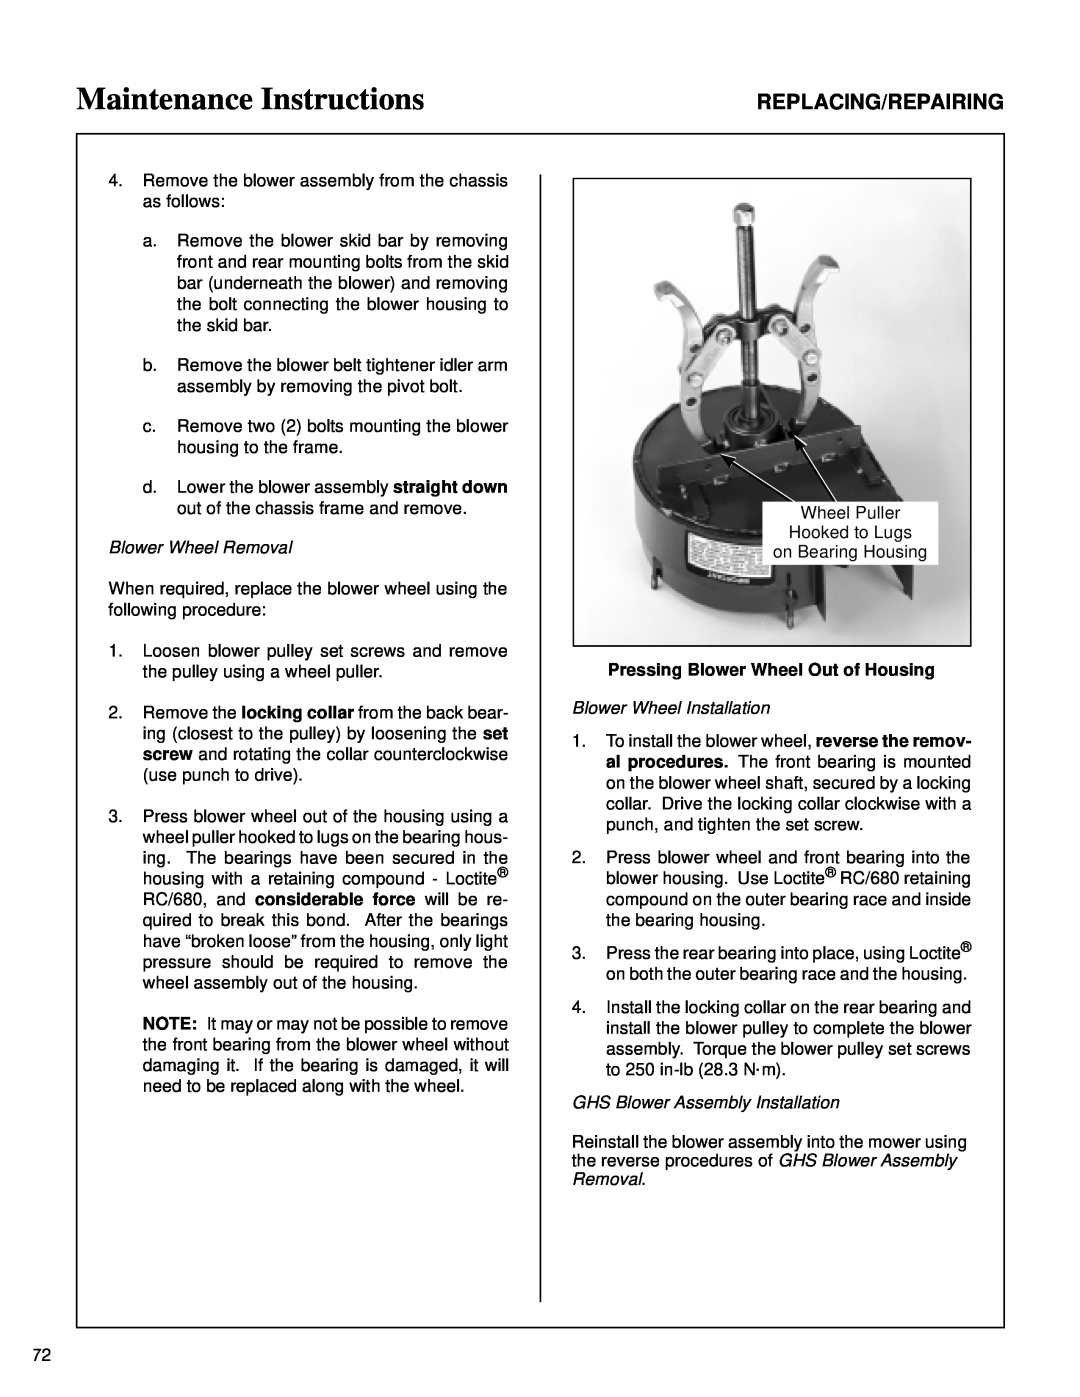 Walker MT Maintenance Instructions, Replacing/Repairing, Blower Wheel Removal, Pressing Blower Wheel Out of Housing 